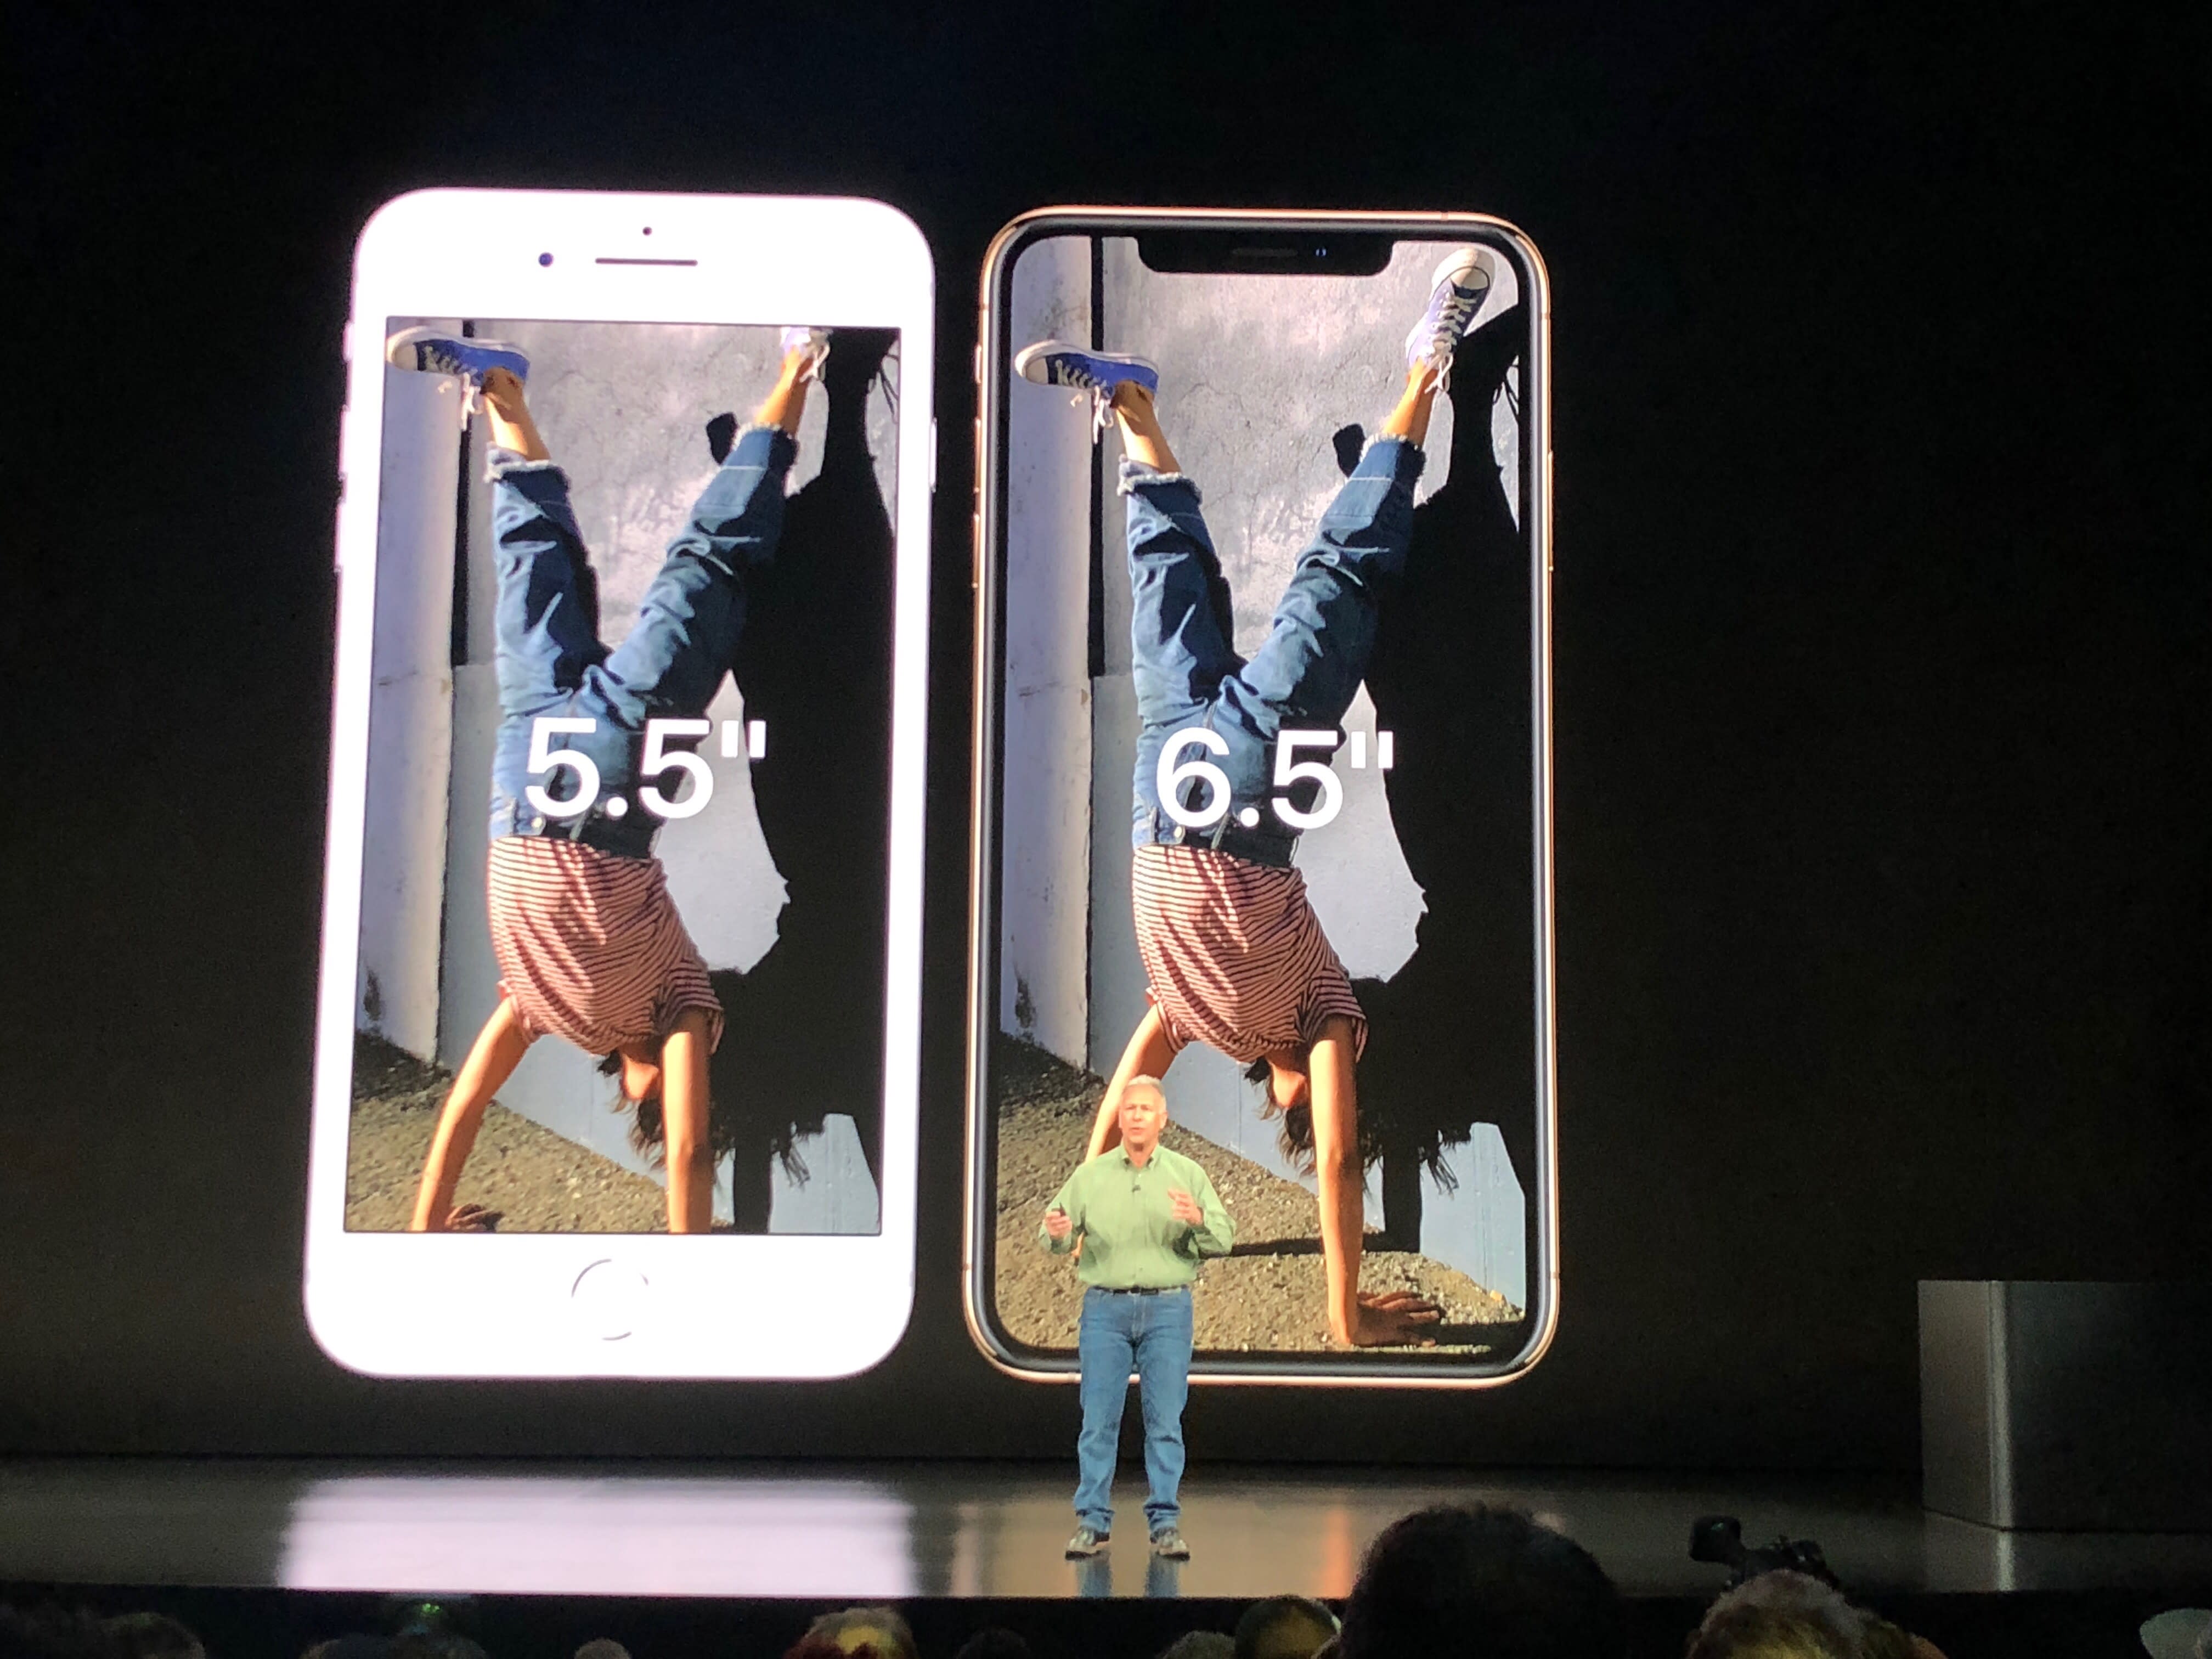 Apple just revealed a new iPhone that has the largest screen yet — meet